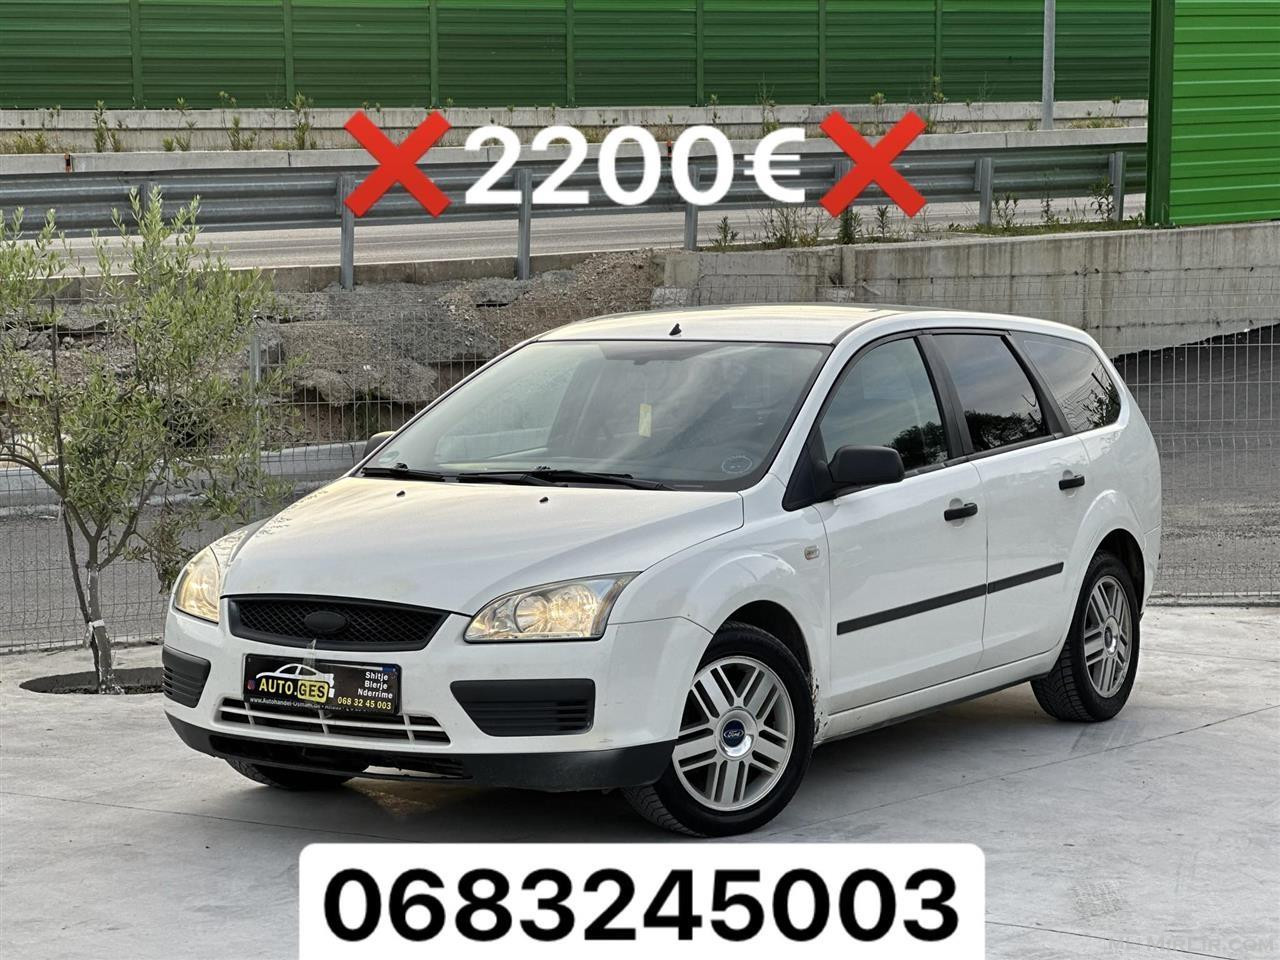 Ford focus 1.6 naft manuale